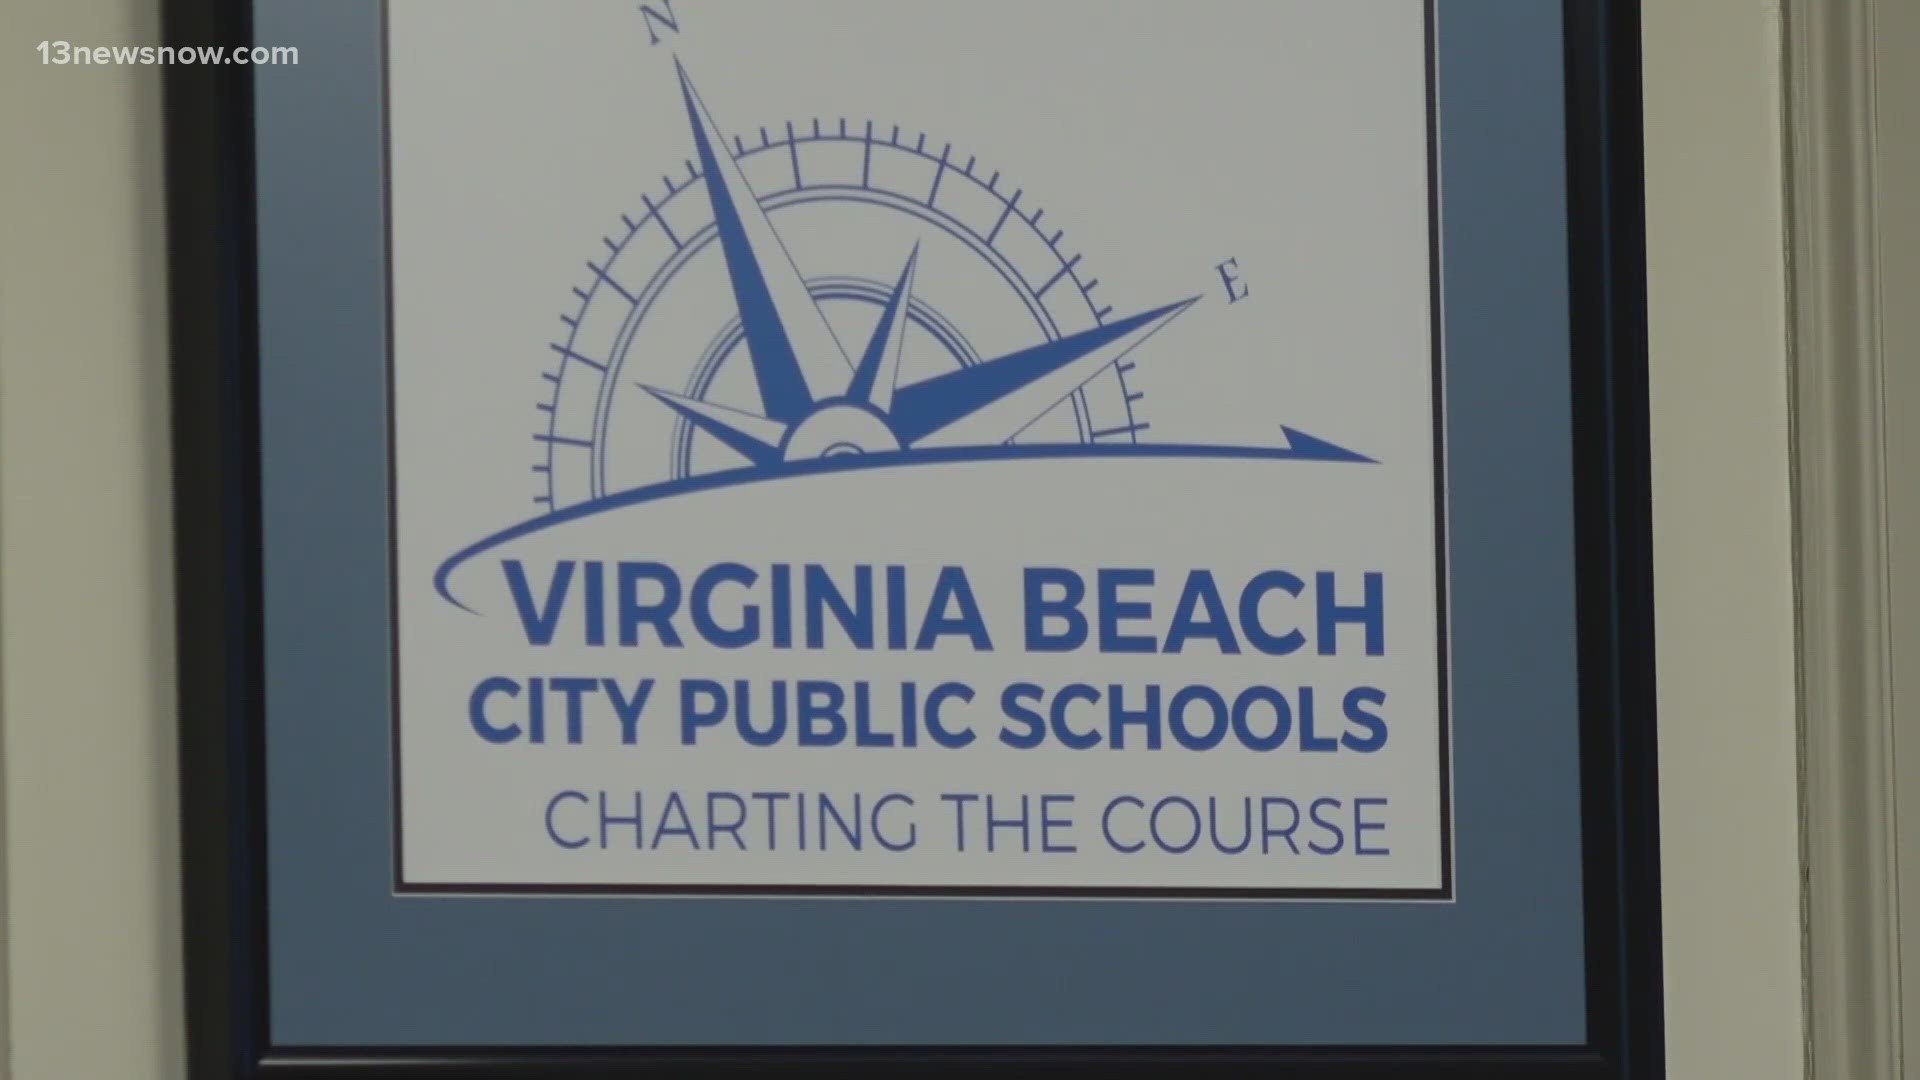 Parent feedback from across Virginia is the basis for a new U.S. Department of Education report.